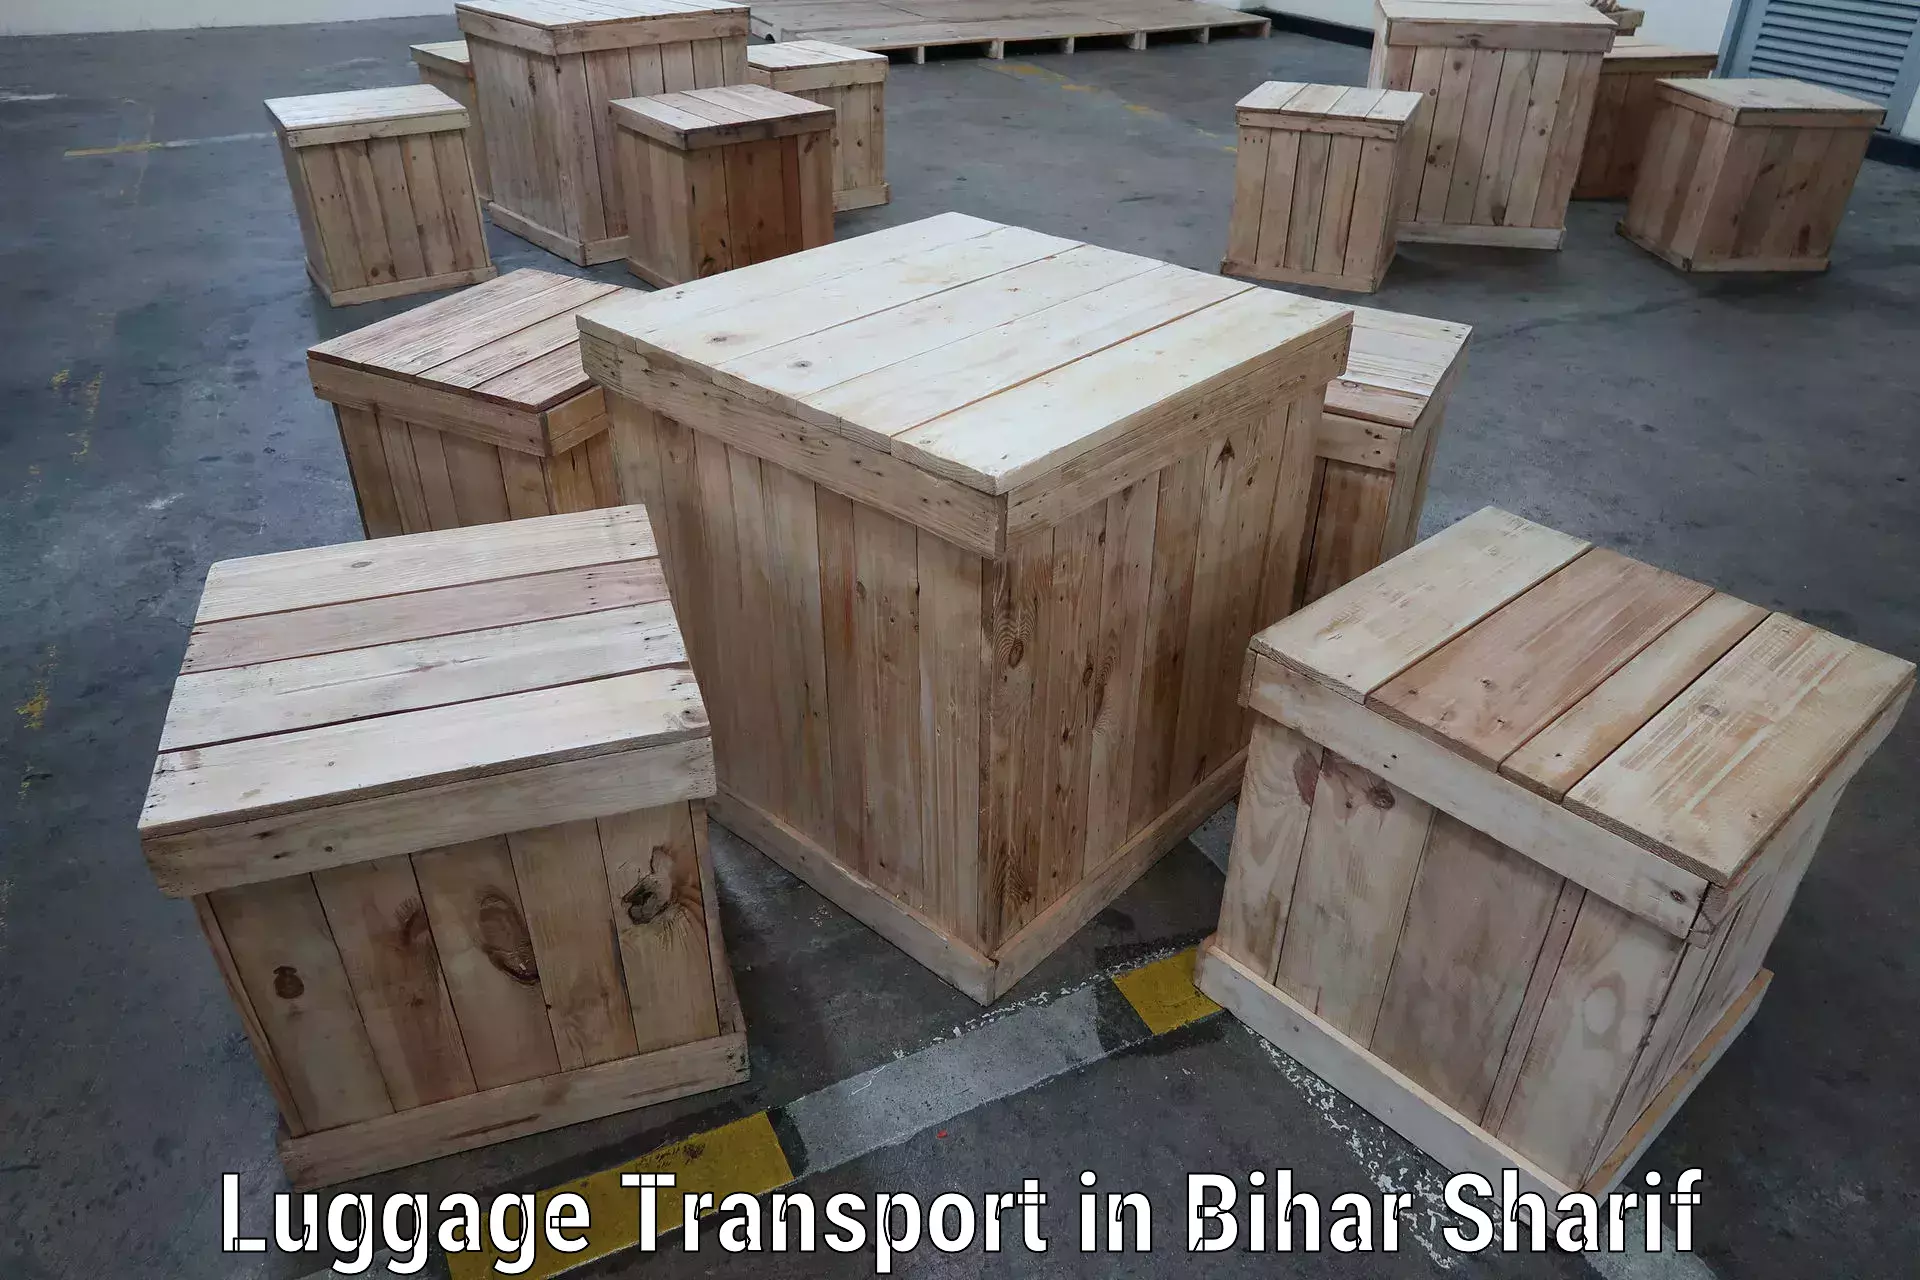 Luggage storage and delivery in Bihar Sharif